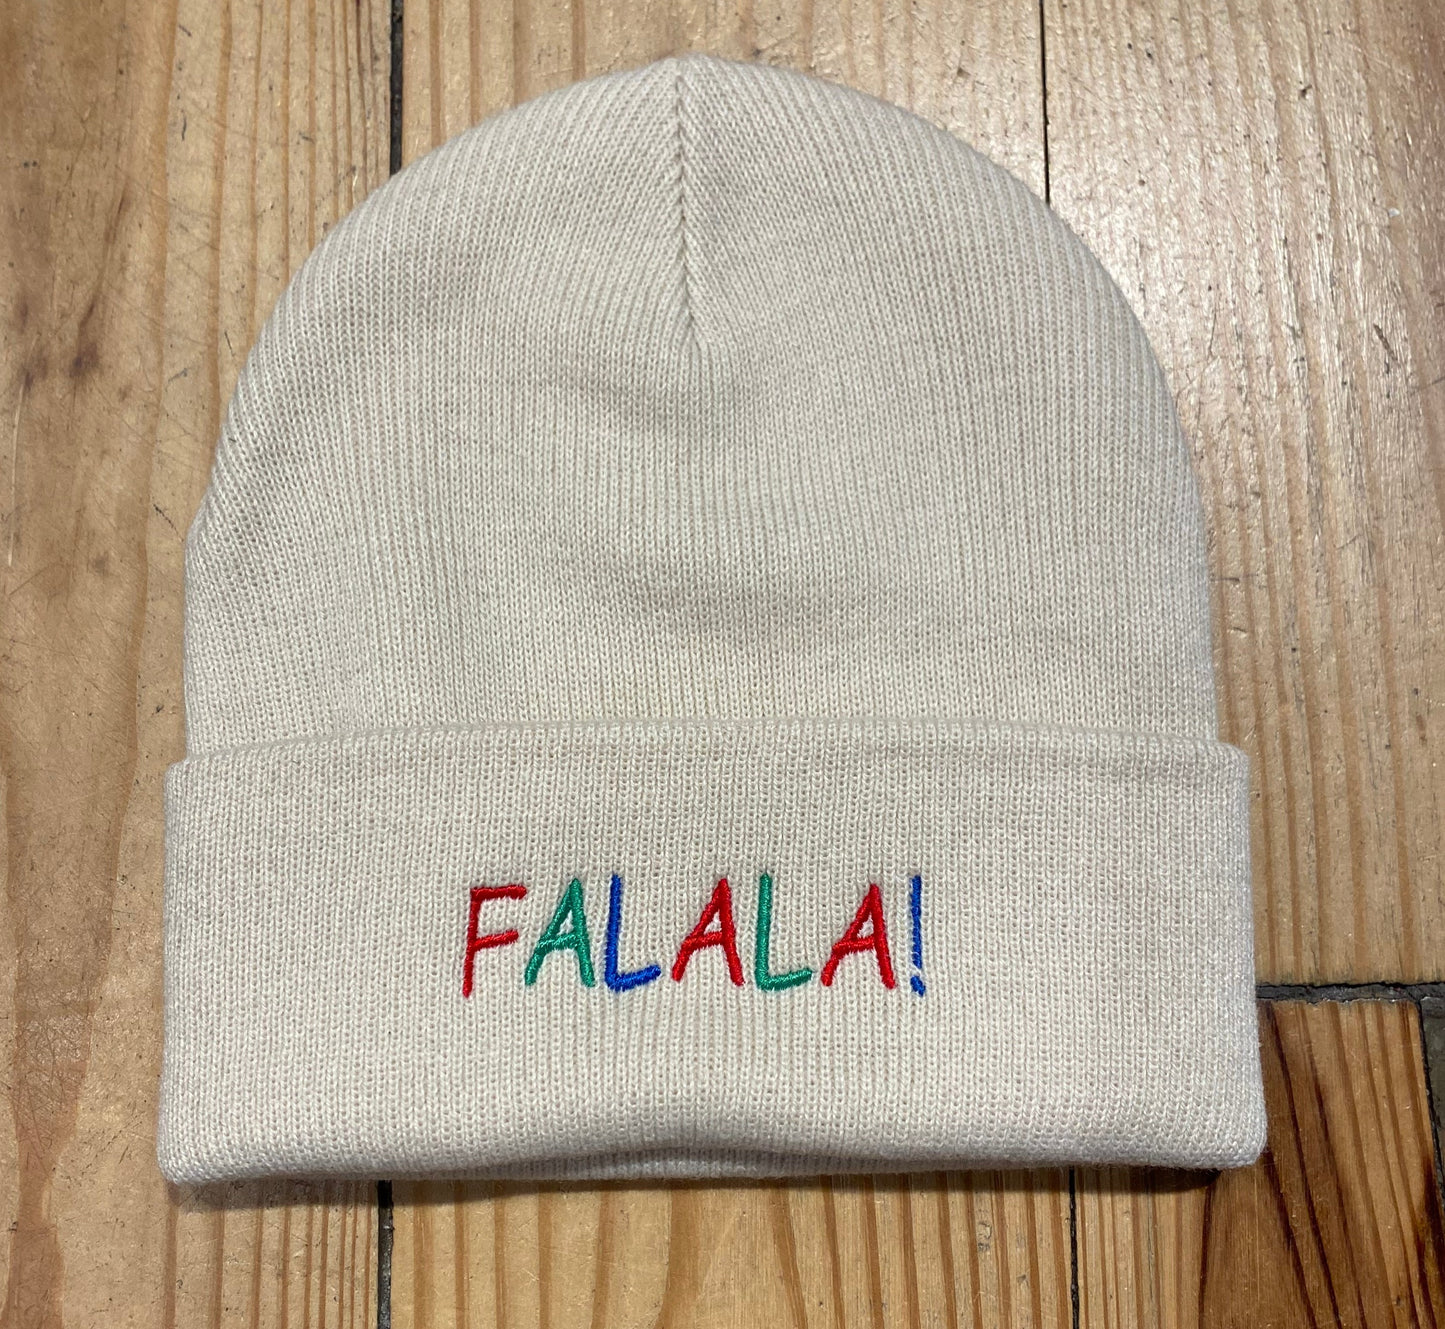 Falala! Embroidered Beige Knit Beanie